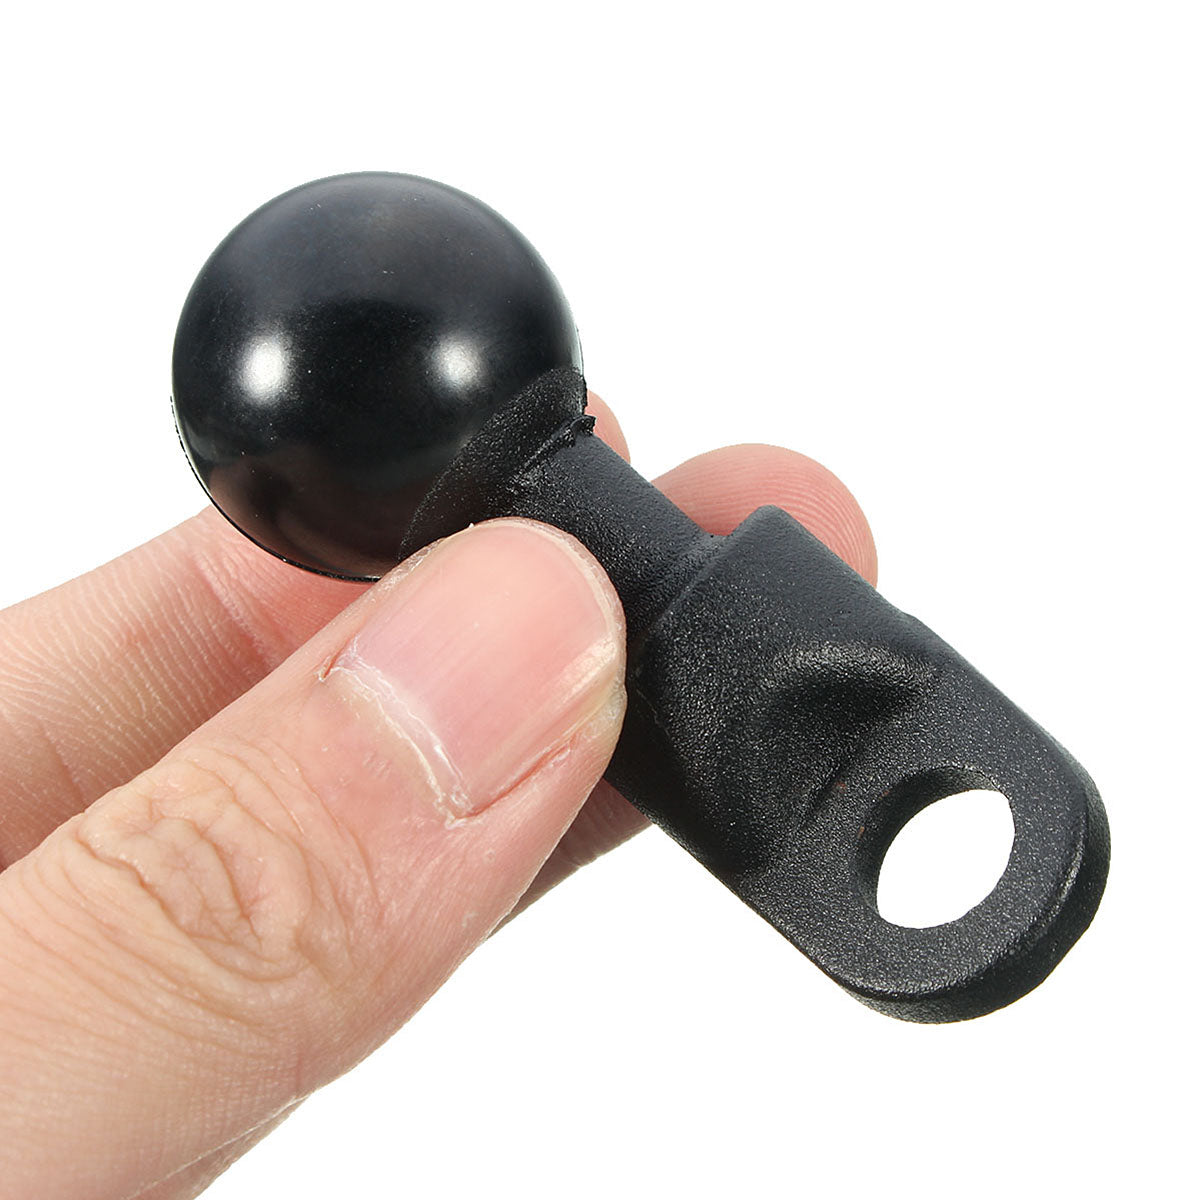 White Black GPS Holder Mounts Motorcycle Base with 9mm Hole and 1inch Ball